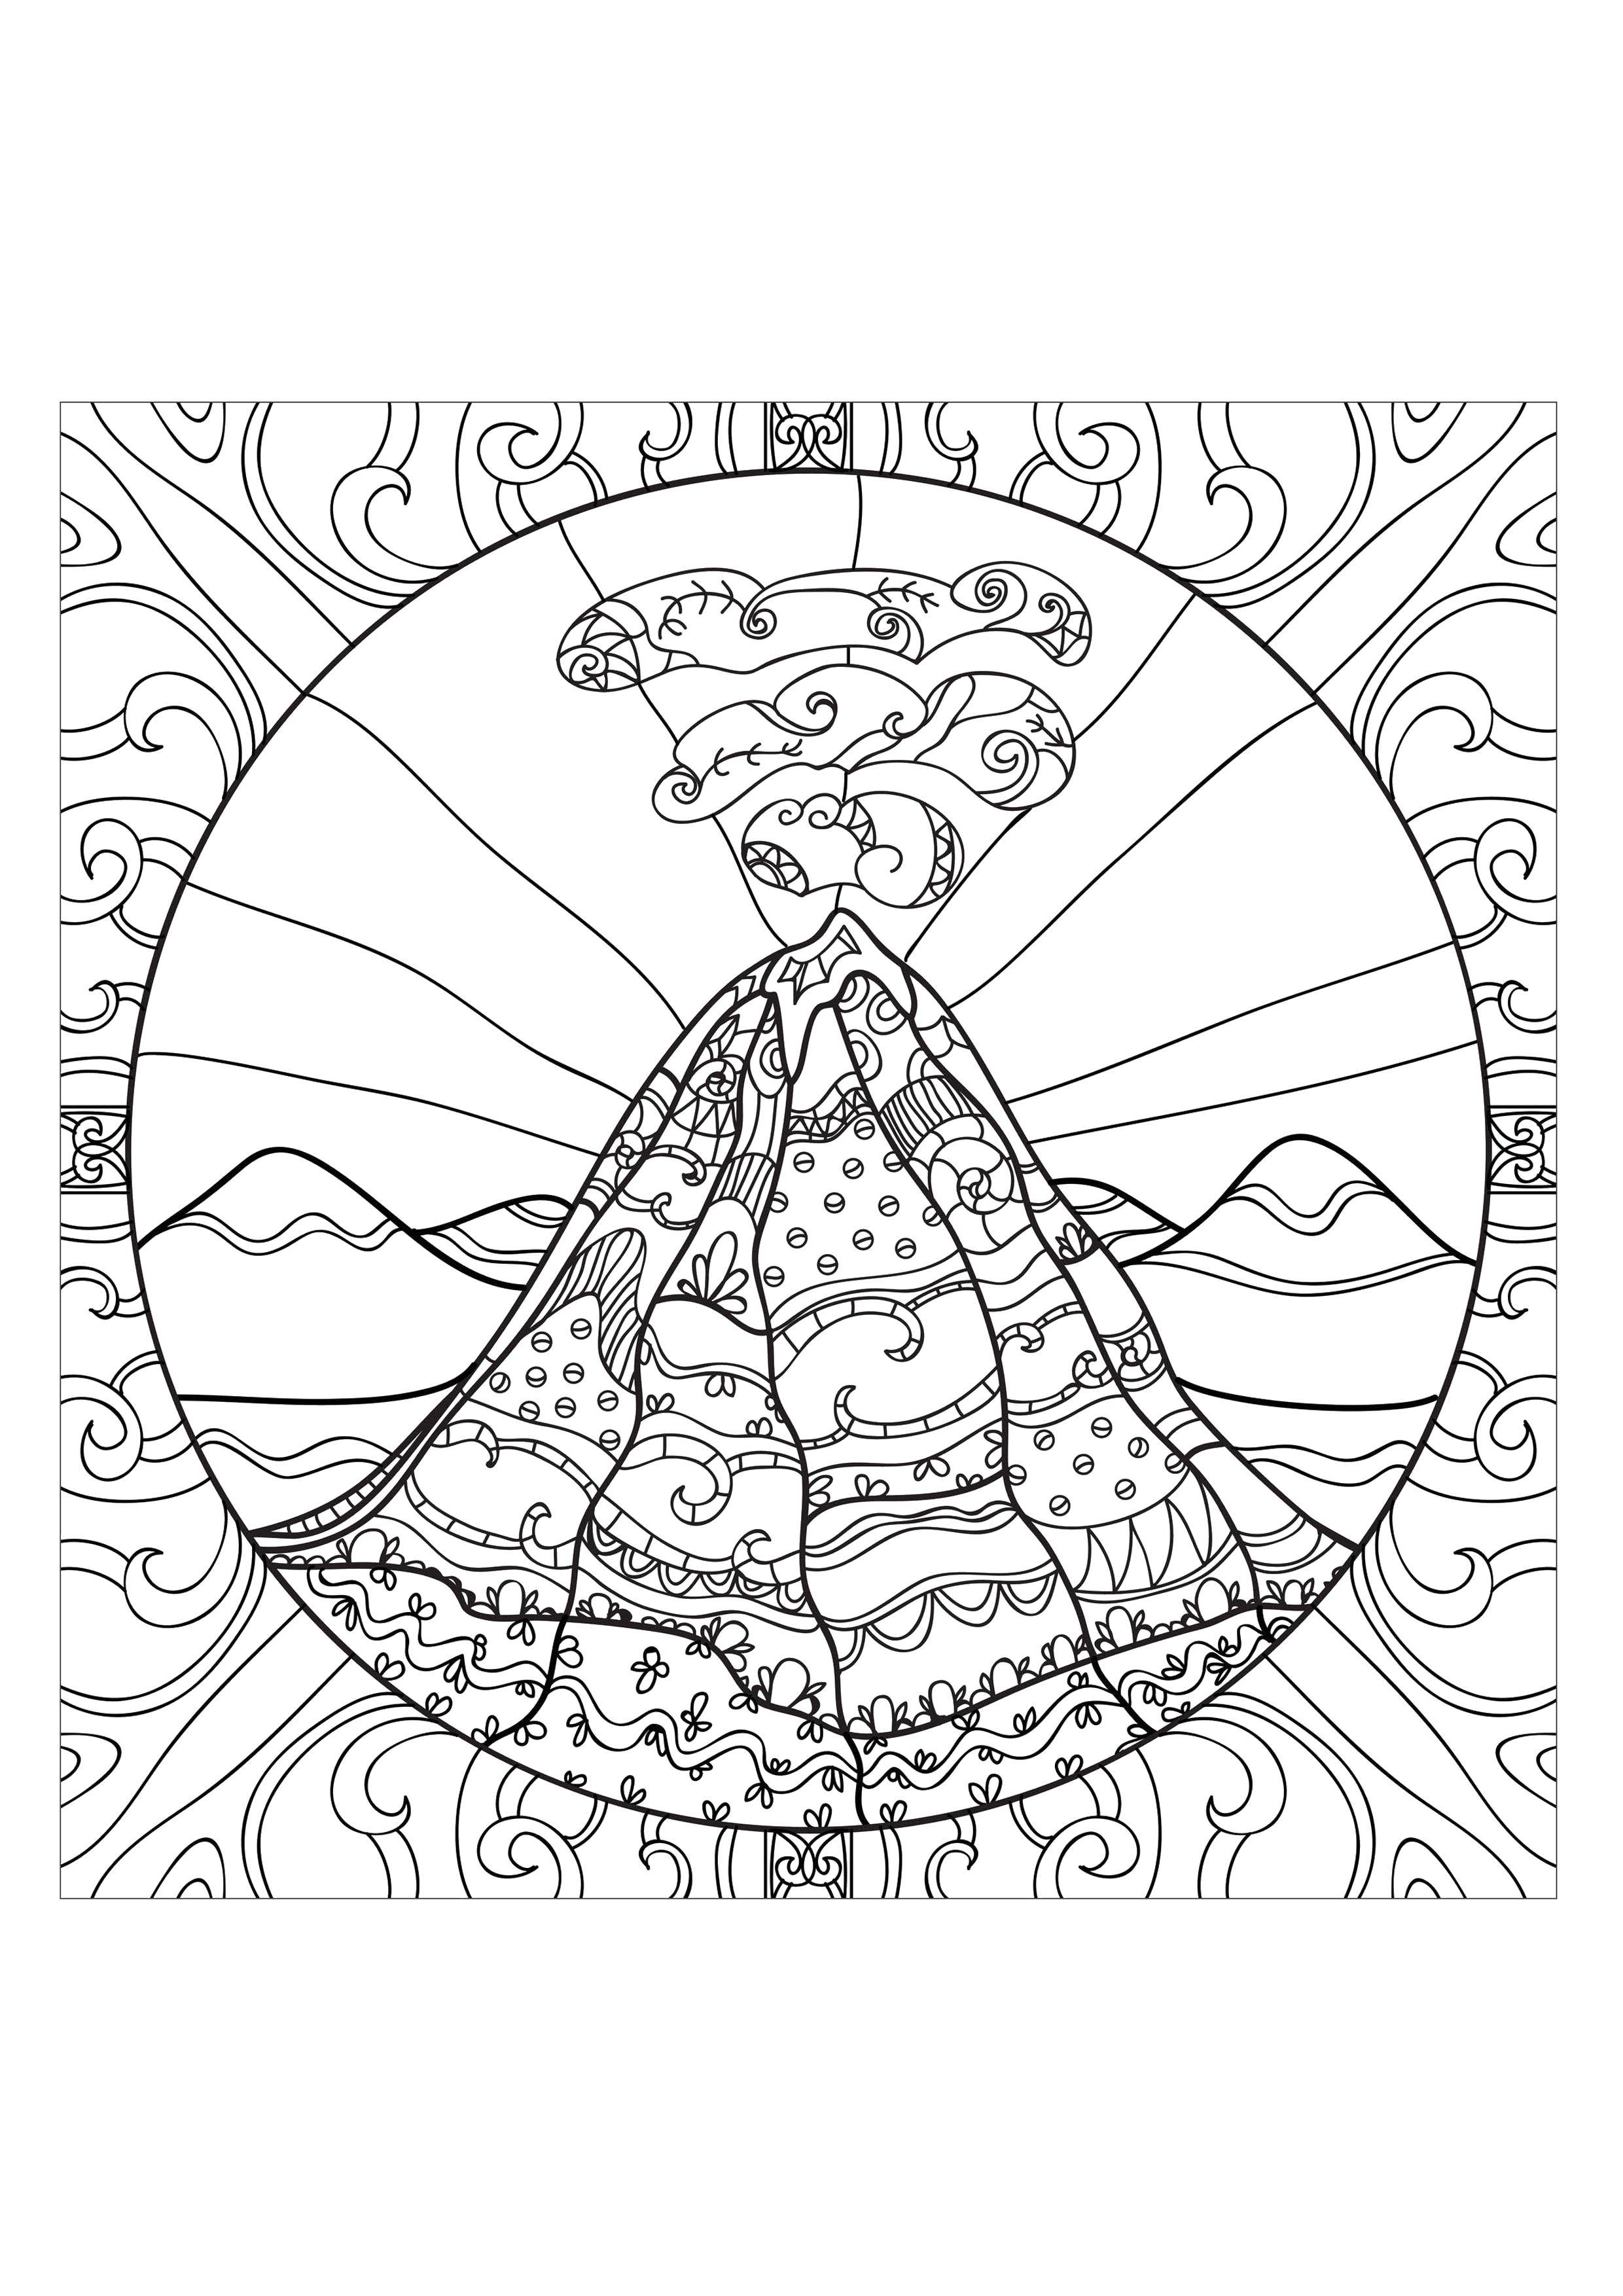 Coloring Patterned volcano. Category patterns. Tags:  Patterns, nature.